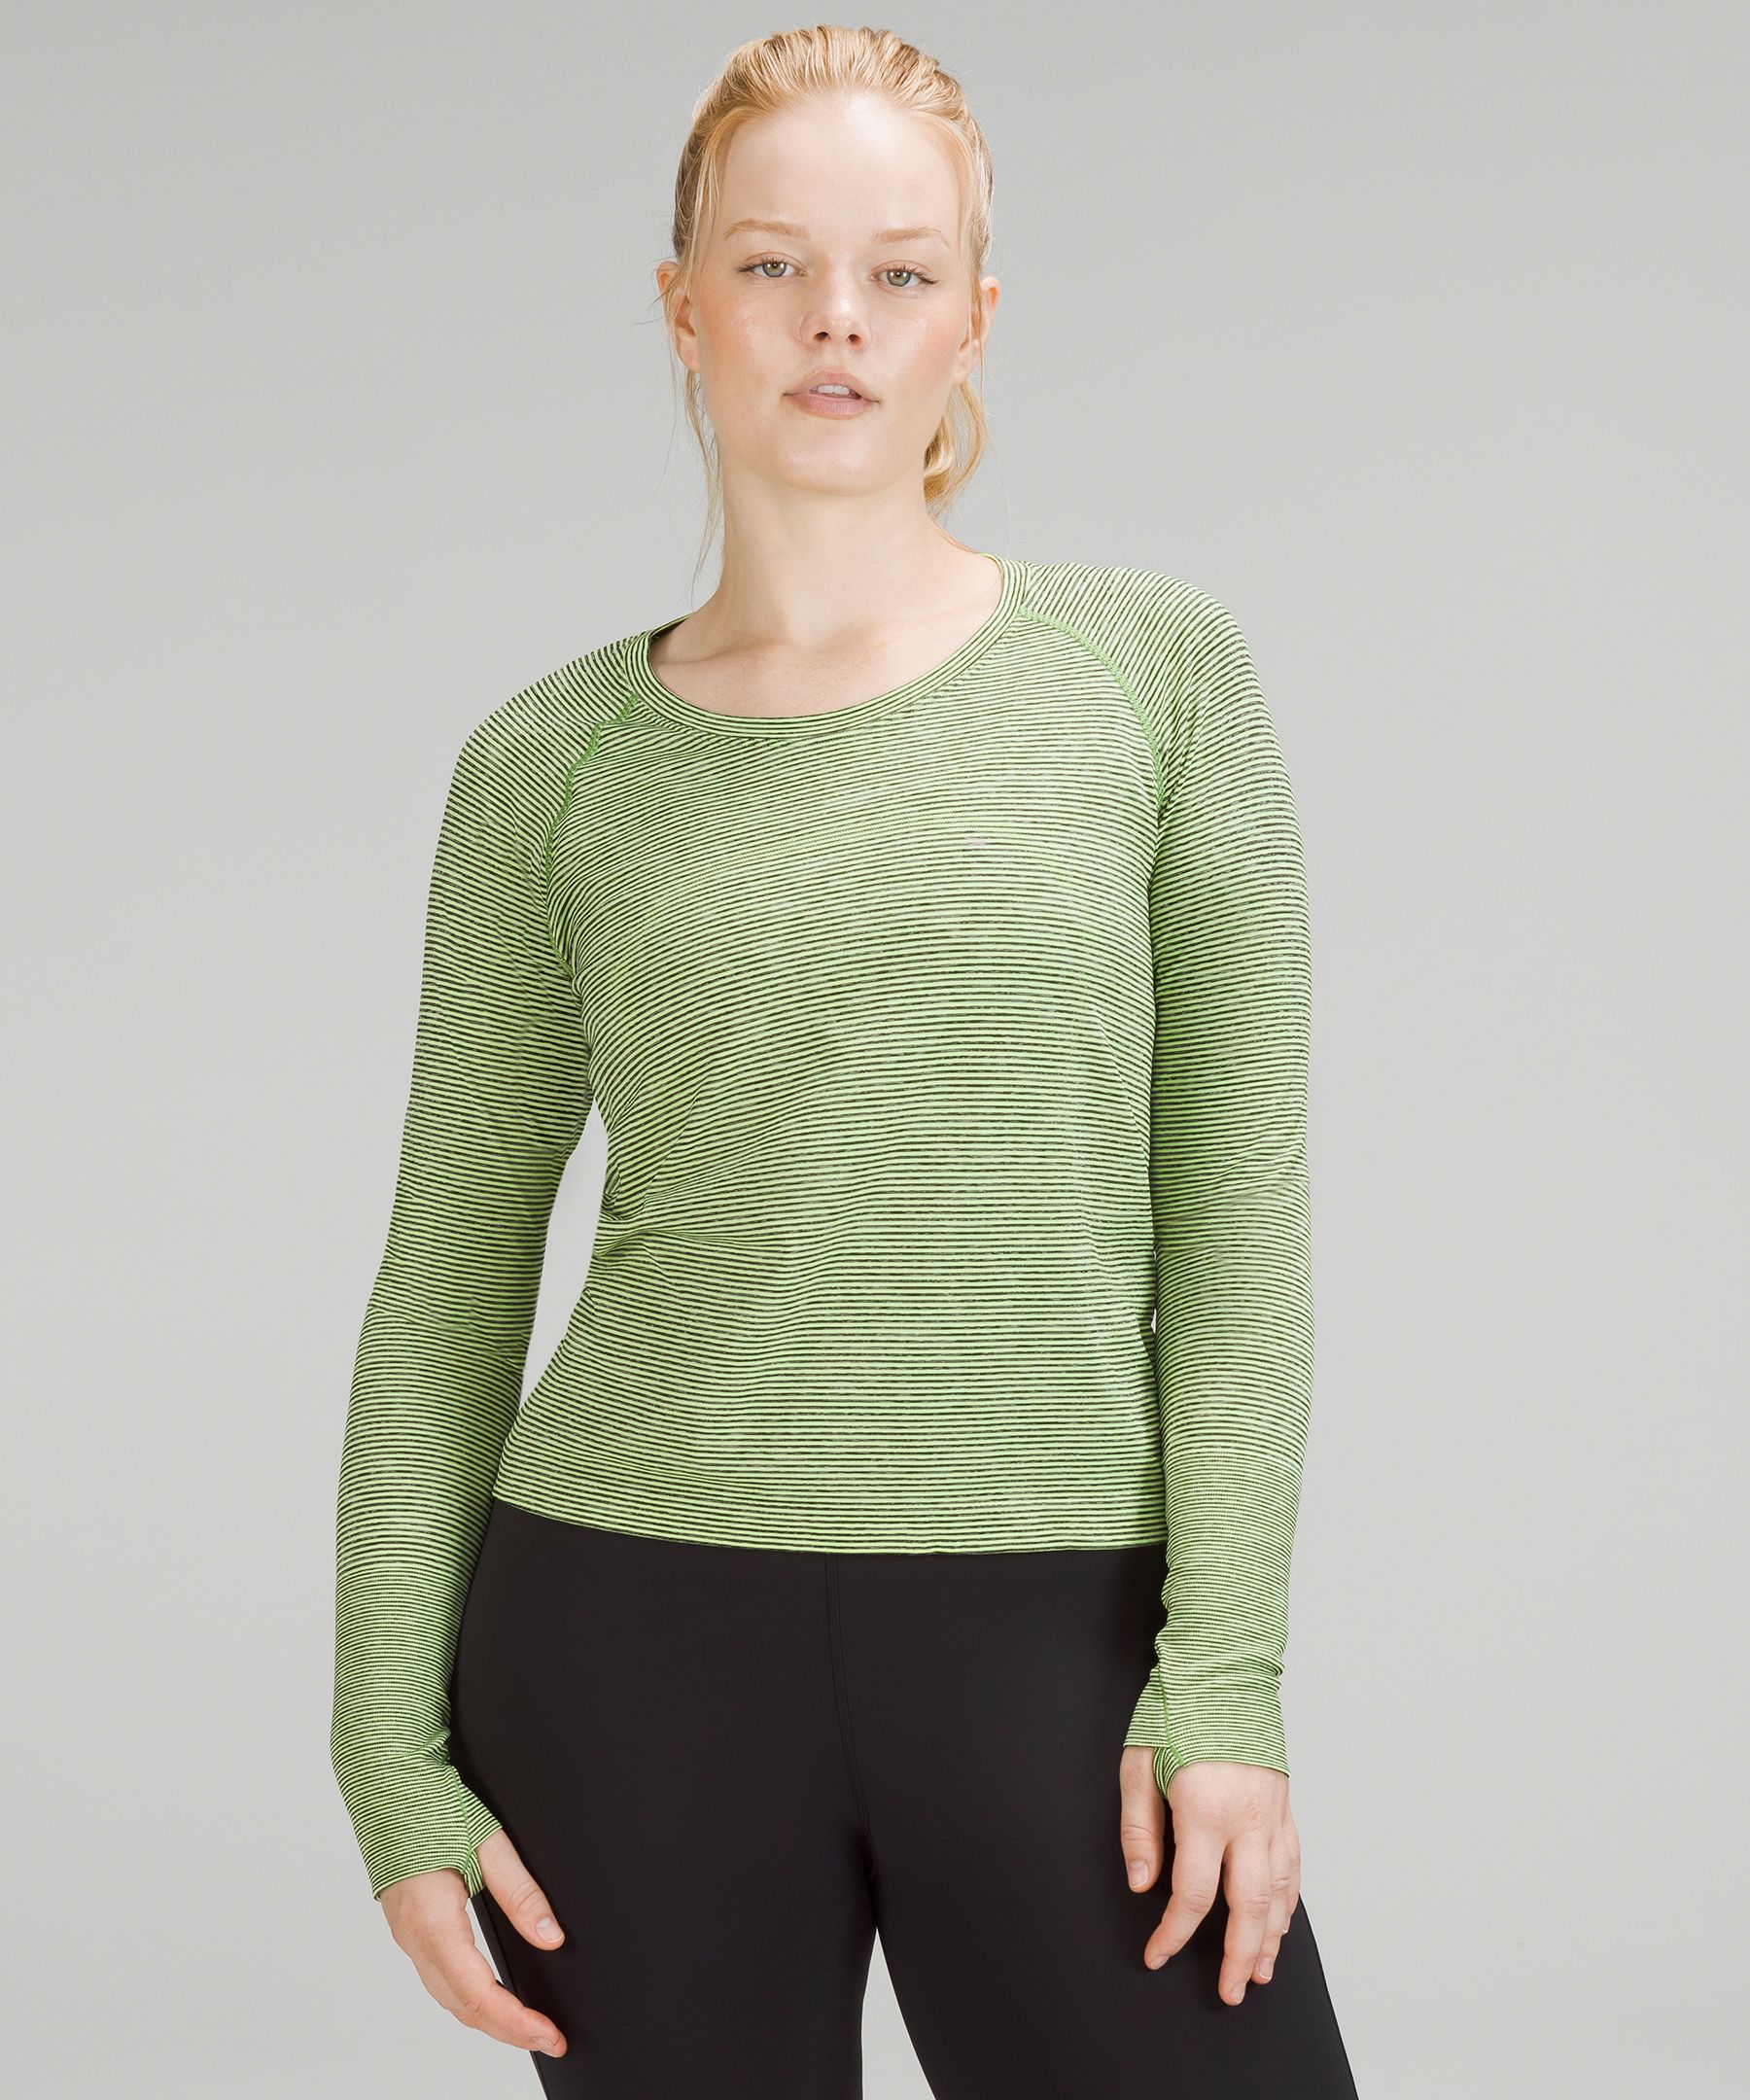 Lululemon Swiftly Tech Long Sleeve Shirt 2.0 Race Length In Wee Are From Space Faded Zap